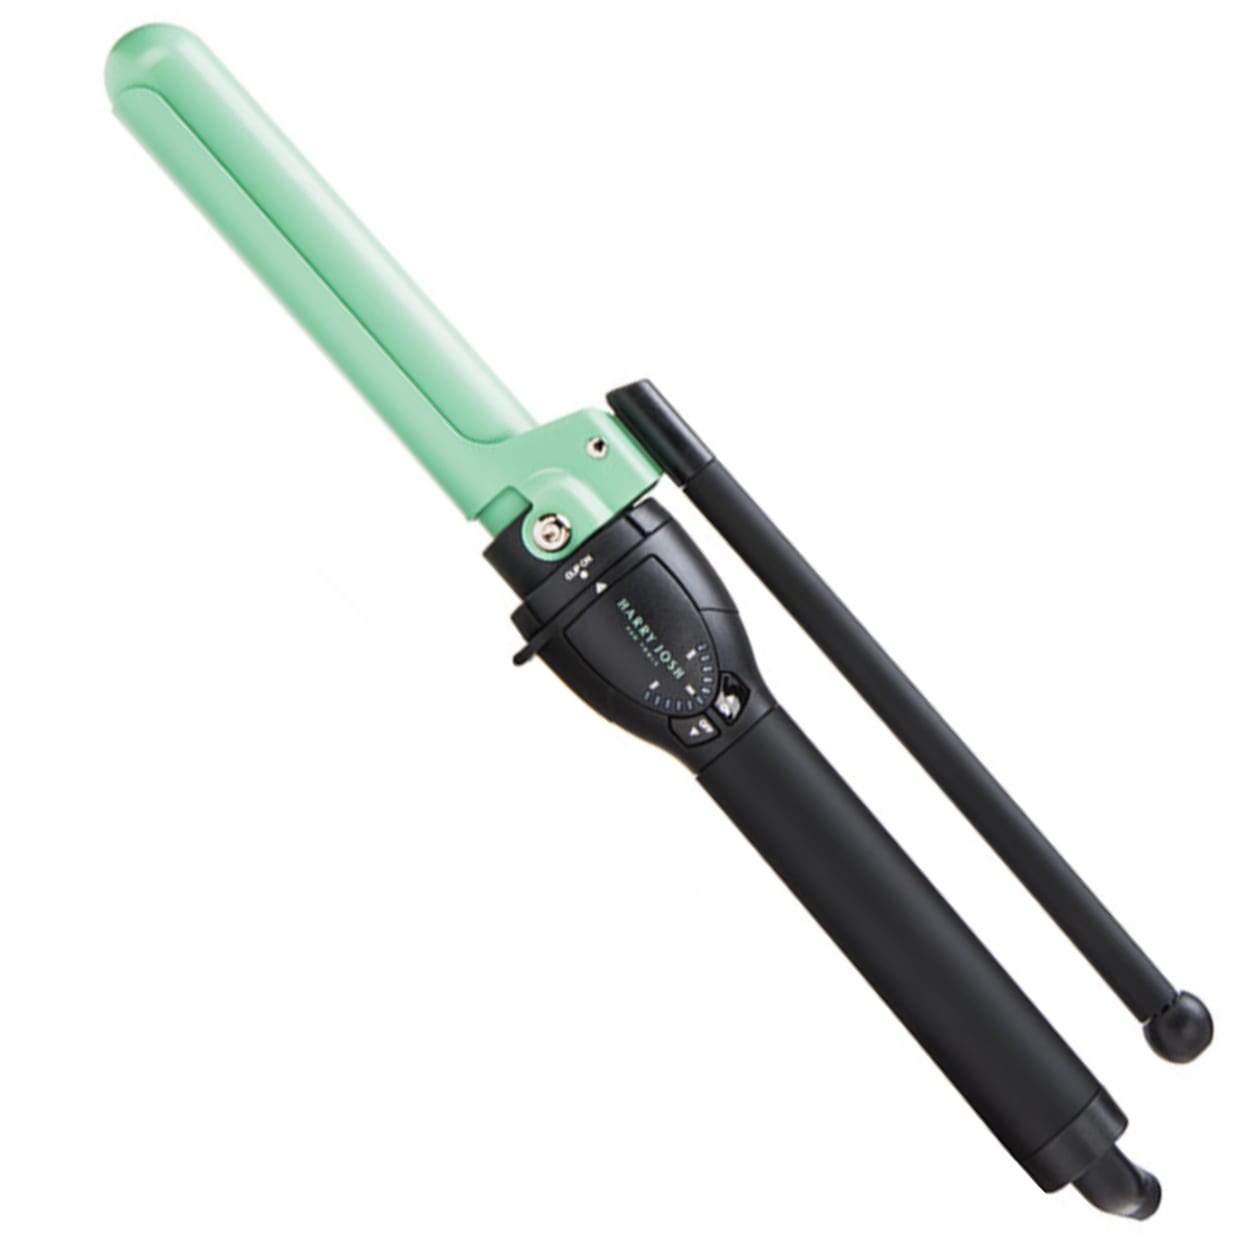 A mint green and black curling iron.